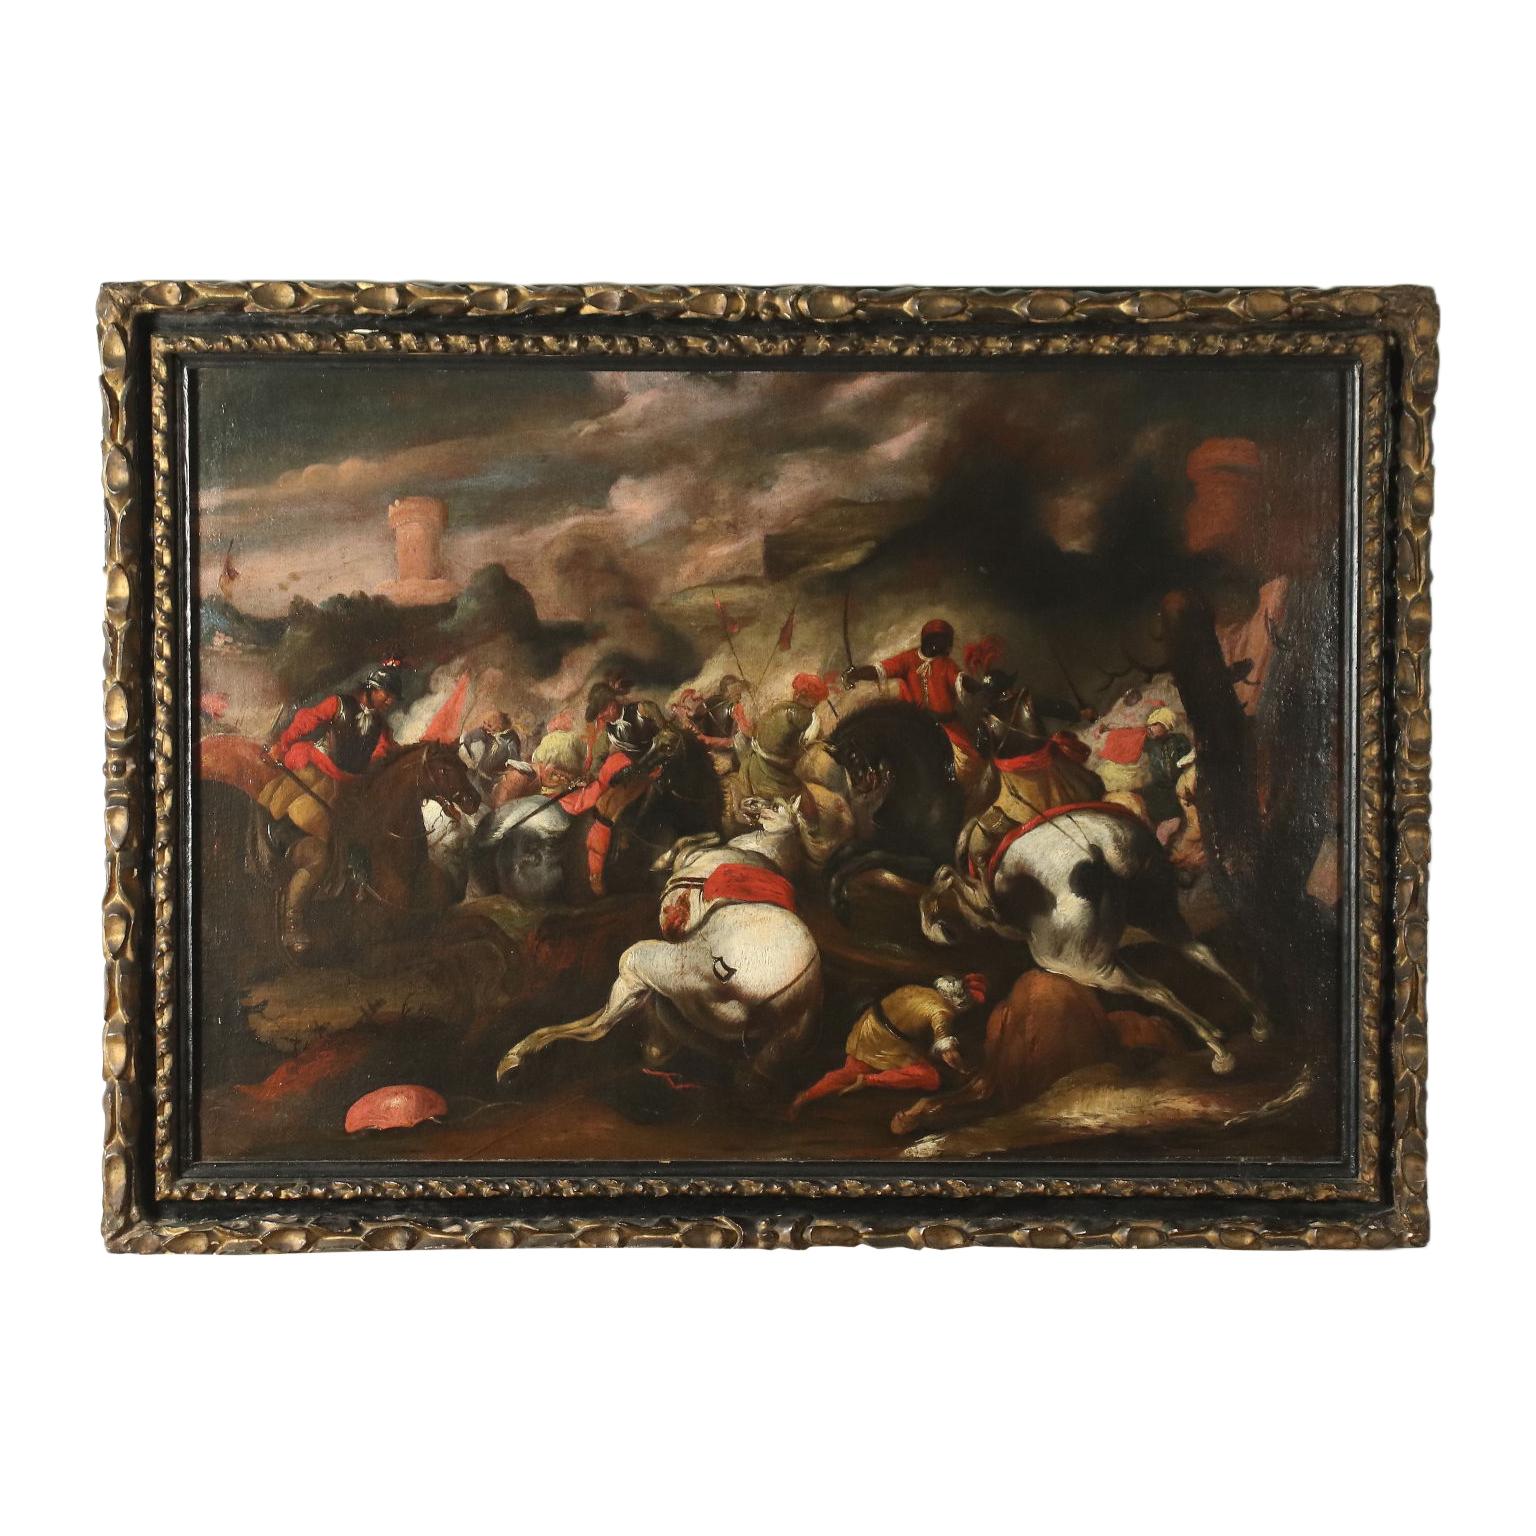 Unknown Figurative Painting - Battle Scene Oil On Canvas 17th 18th Century